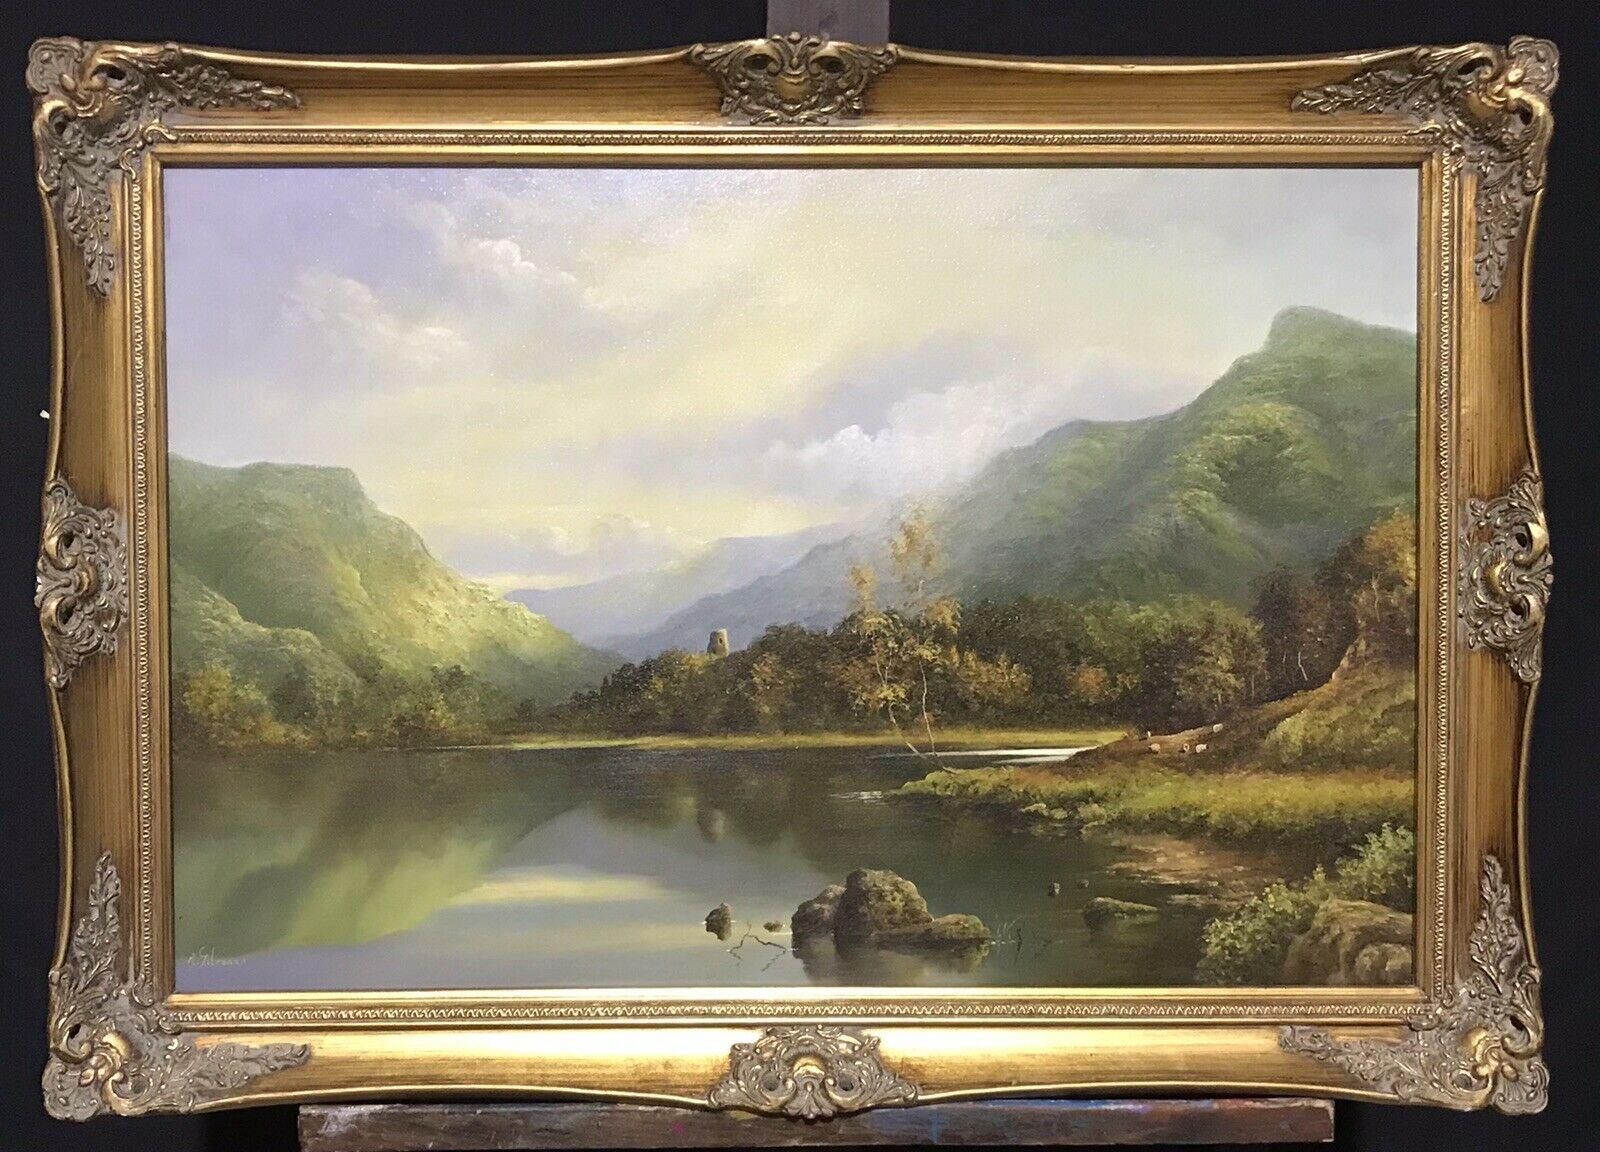 FINE LARGE WELSH TRANQUIL LAKE & CASTLE SCENE LANDSCAPE SIGNED OIL PAINTING - Painting by Welsh artist